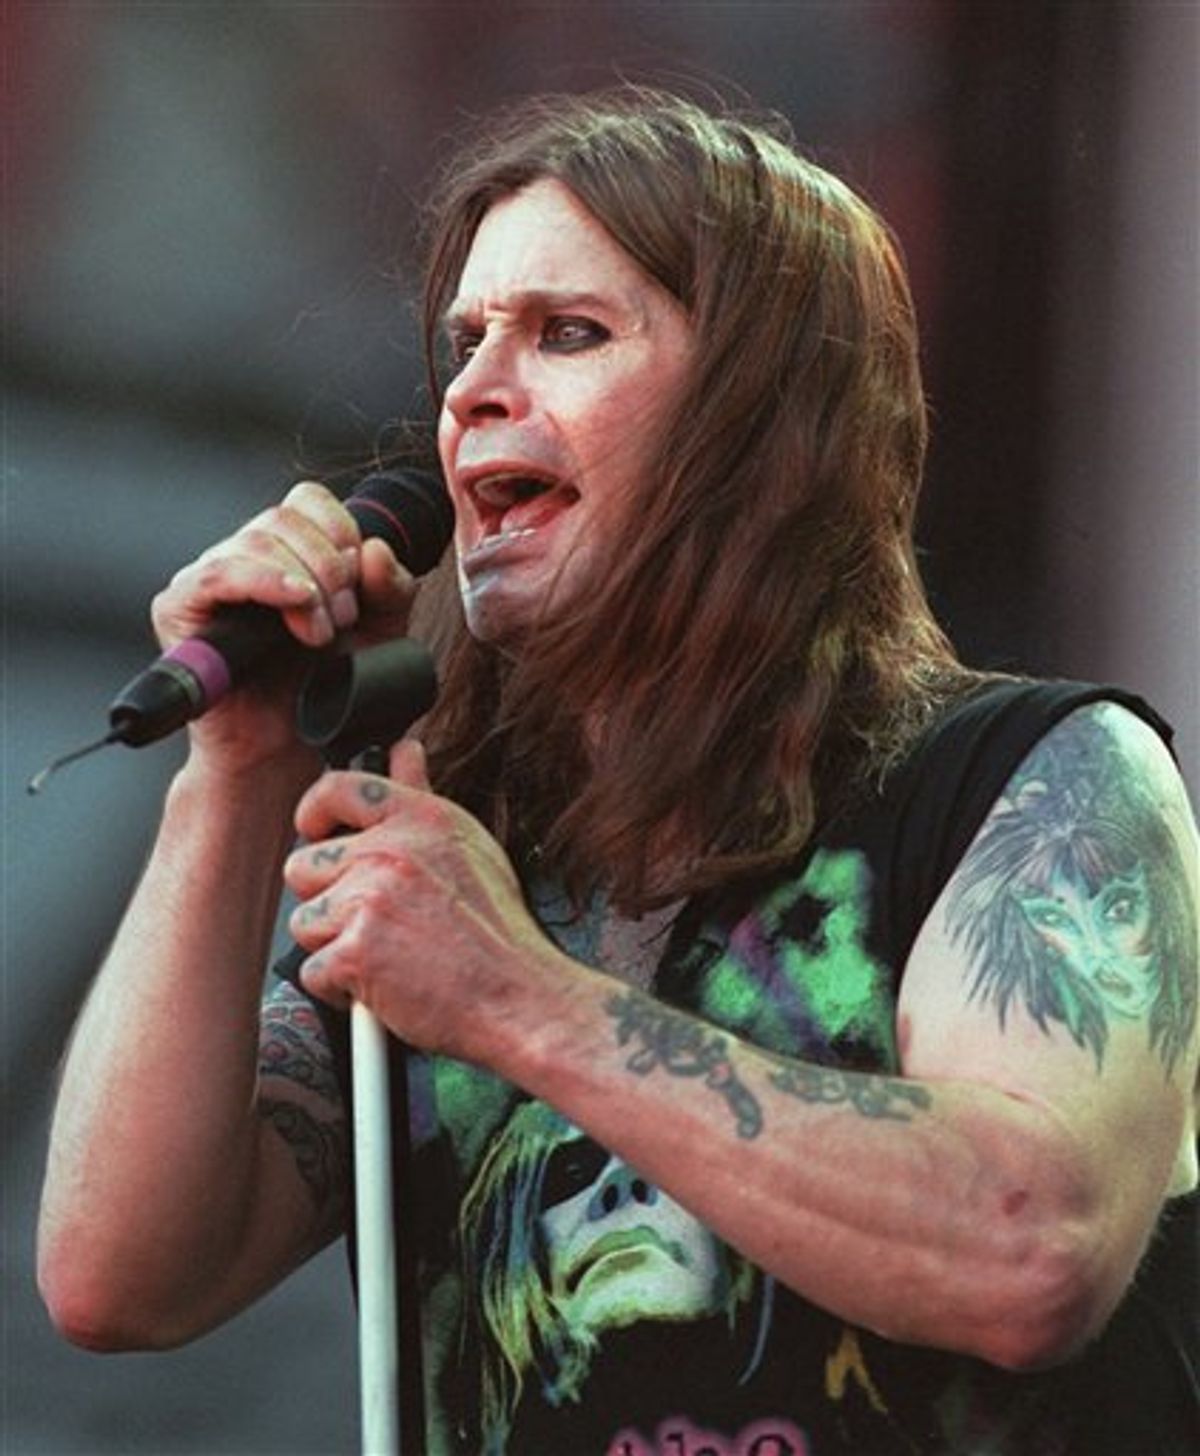 FILE - In this June 15, 1997 file photo, Ozzy Osbourne performs with Black Sabbath during the Ozzfest concert at the Meadowlands in East Rutherford, N.J. (AP Photo/Bill Kostroun, file)   (AP)